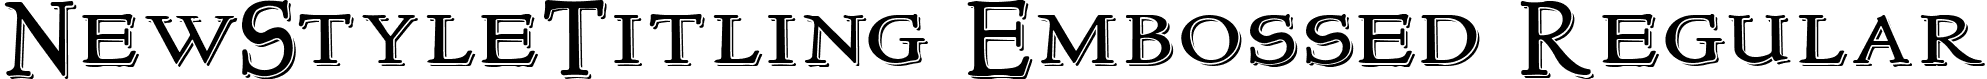 NewStyleTitling Embossed Regular font - New_Style_Titling_Embossed.ttf